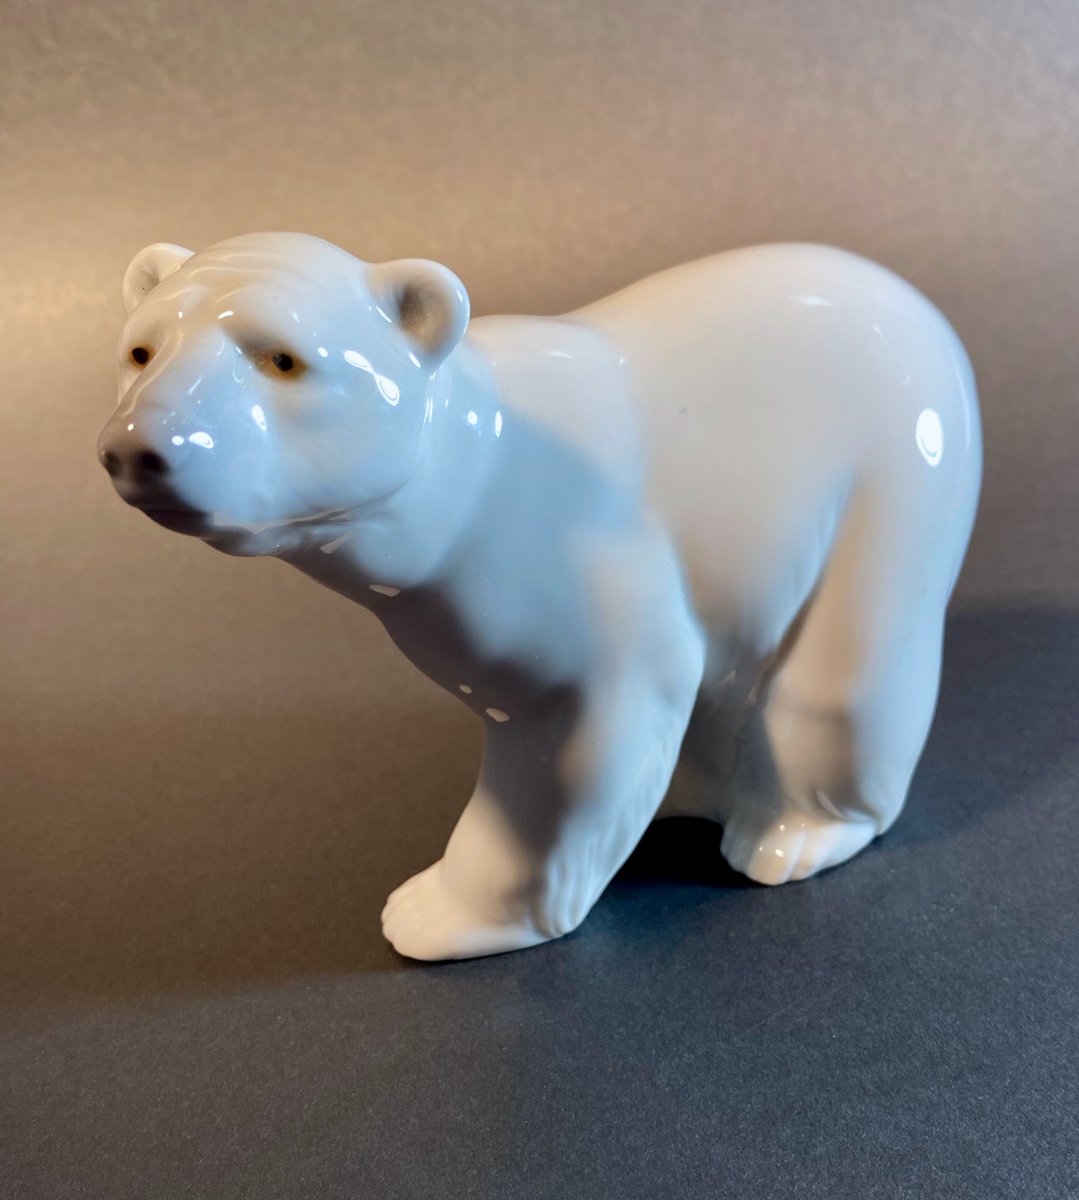 For sale 🔥 Vintage White porcelain polar bear sculpture by Lladro

See curated eclectic objects from around the world.

At Busacca Gallery 🔥

busaccagallery.com/catalog.php?it…

#Polarbear #Porcelain #Ceramic #Pottery #ArtPottery #CeramicPottery #CeramicPorcelain #ArtPorsche #ArtCeramics